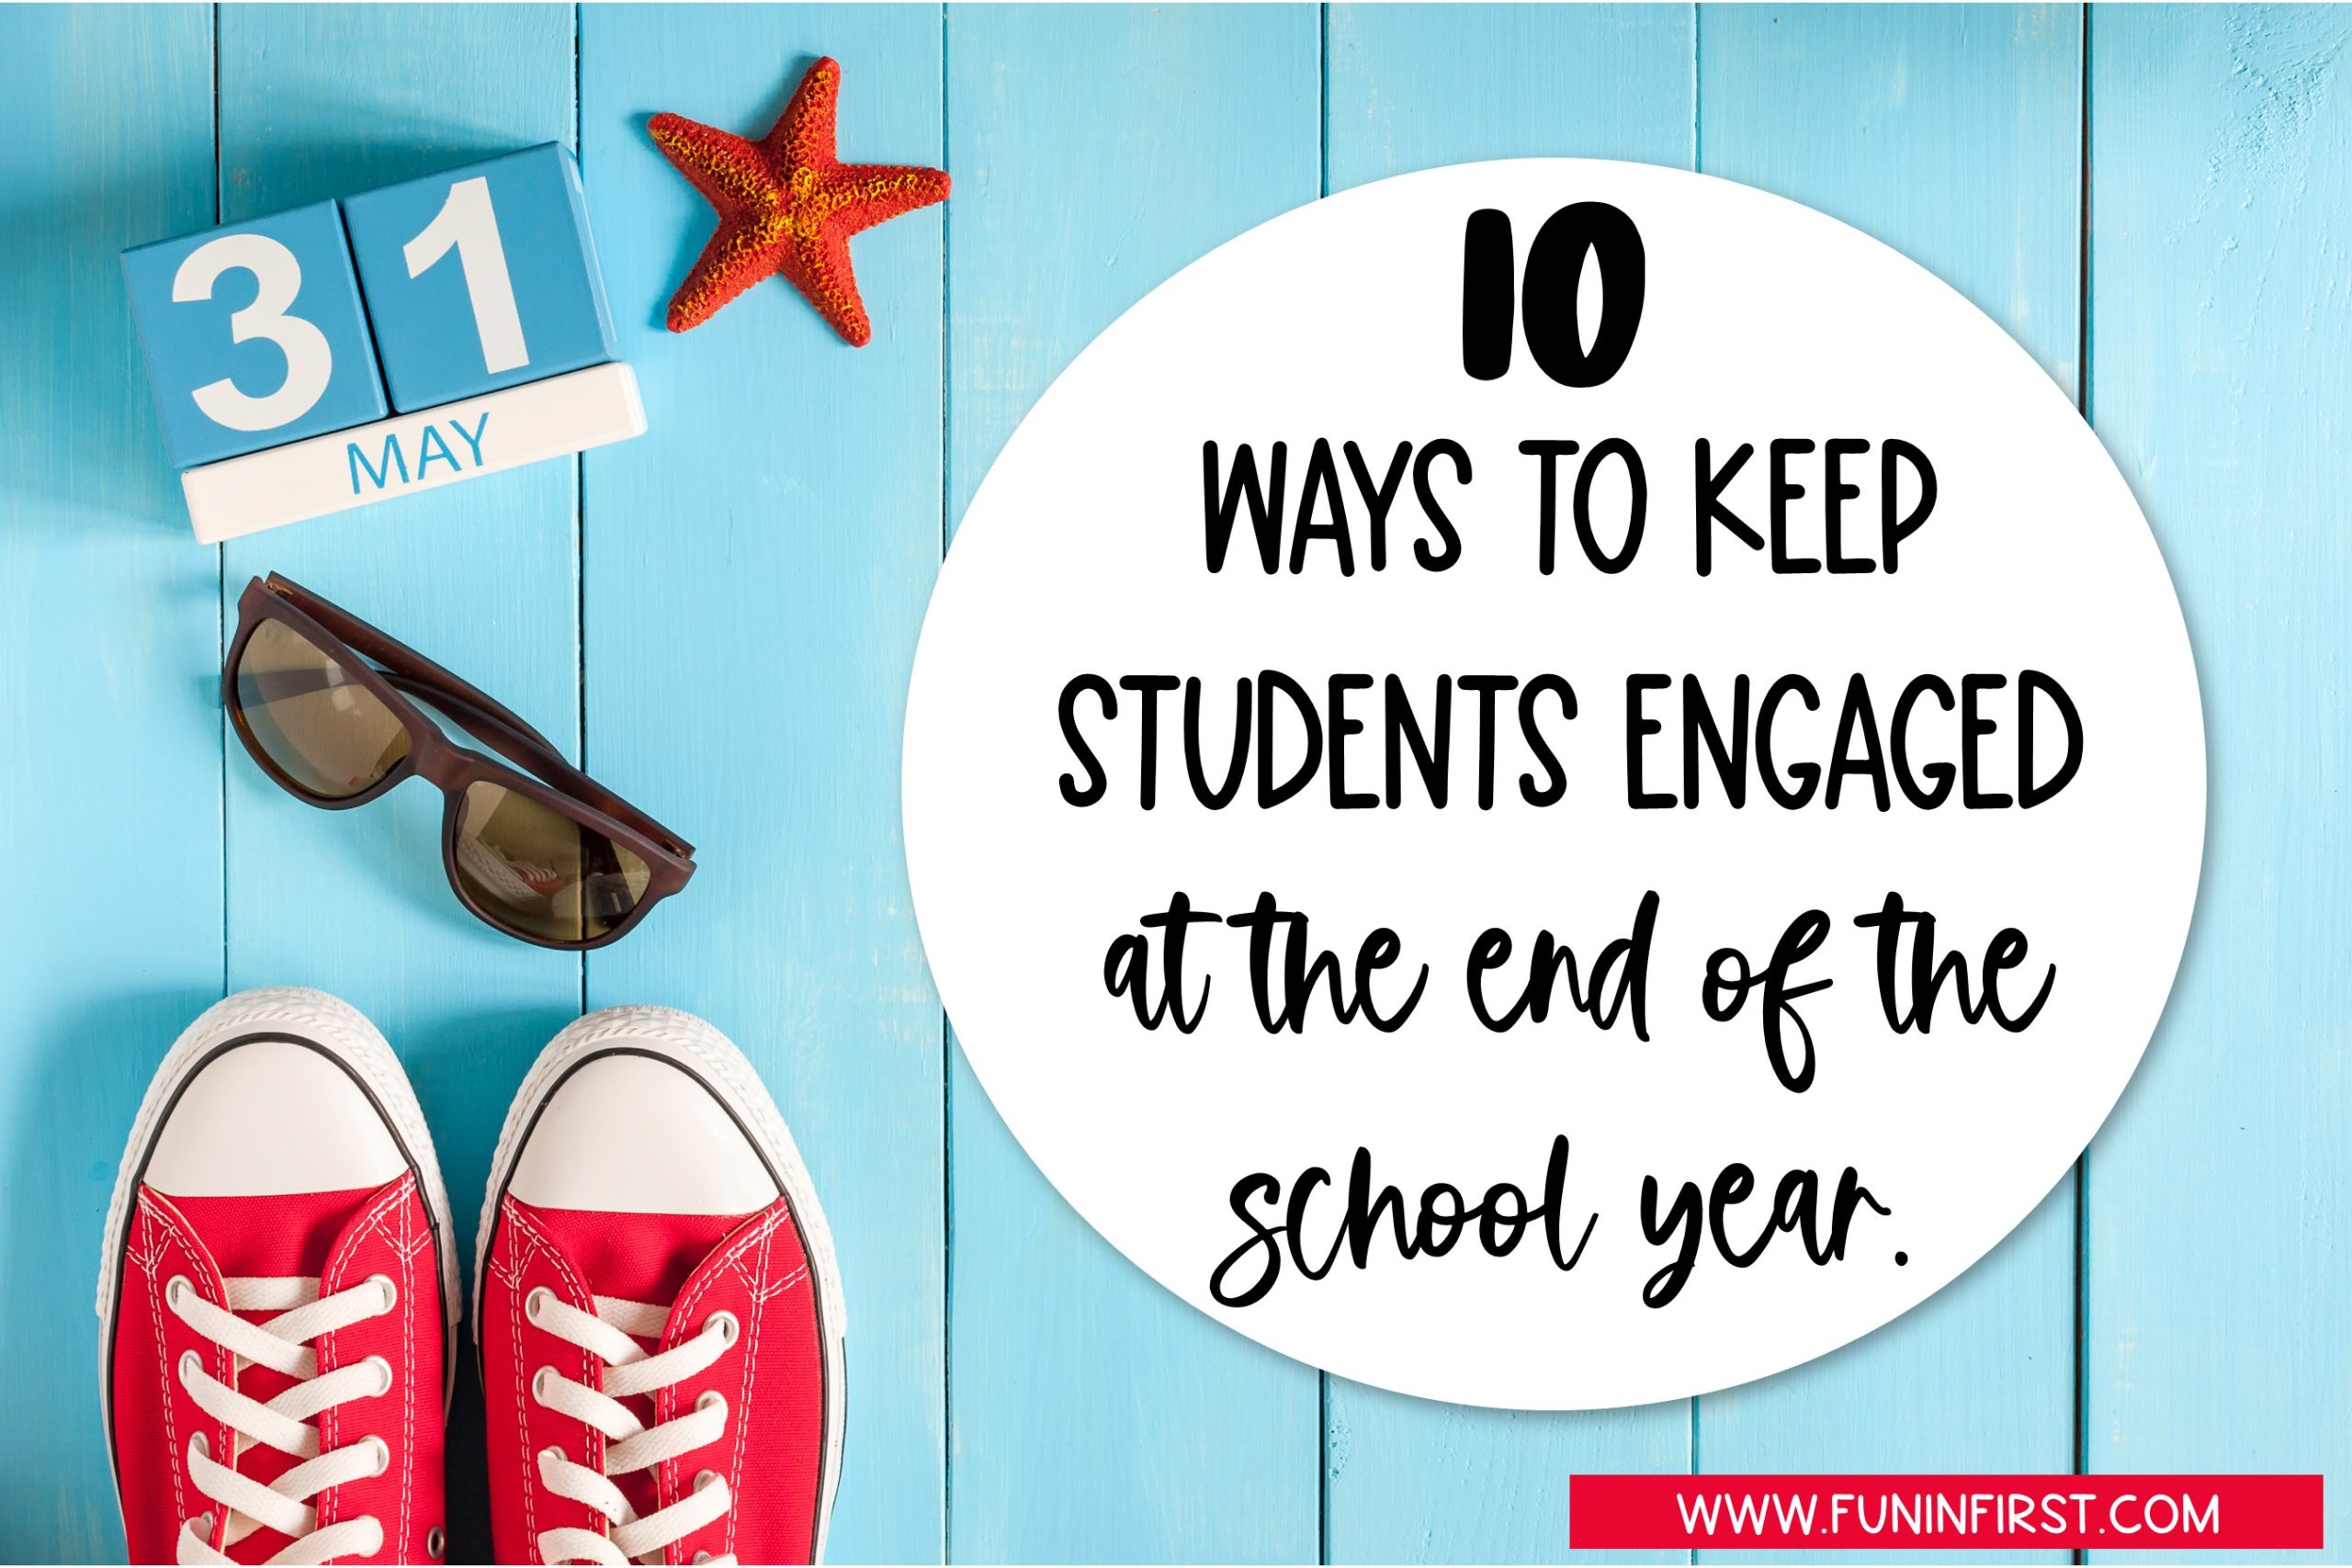 10 Ways to Keep Students Engaged at the End of the School Year